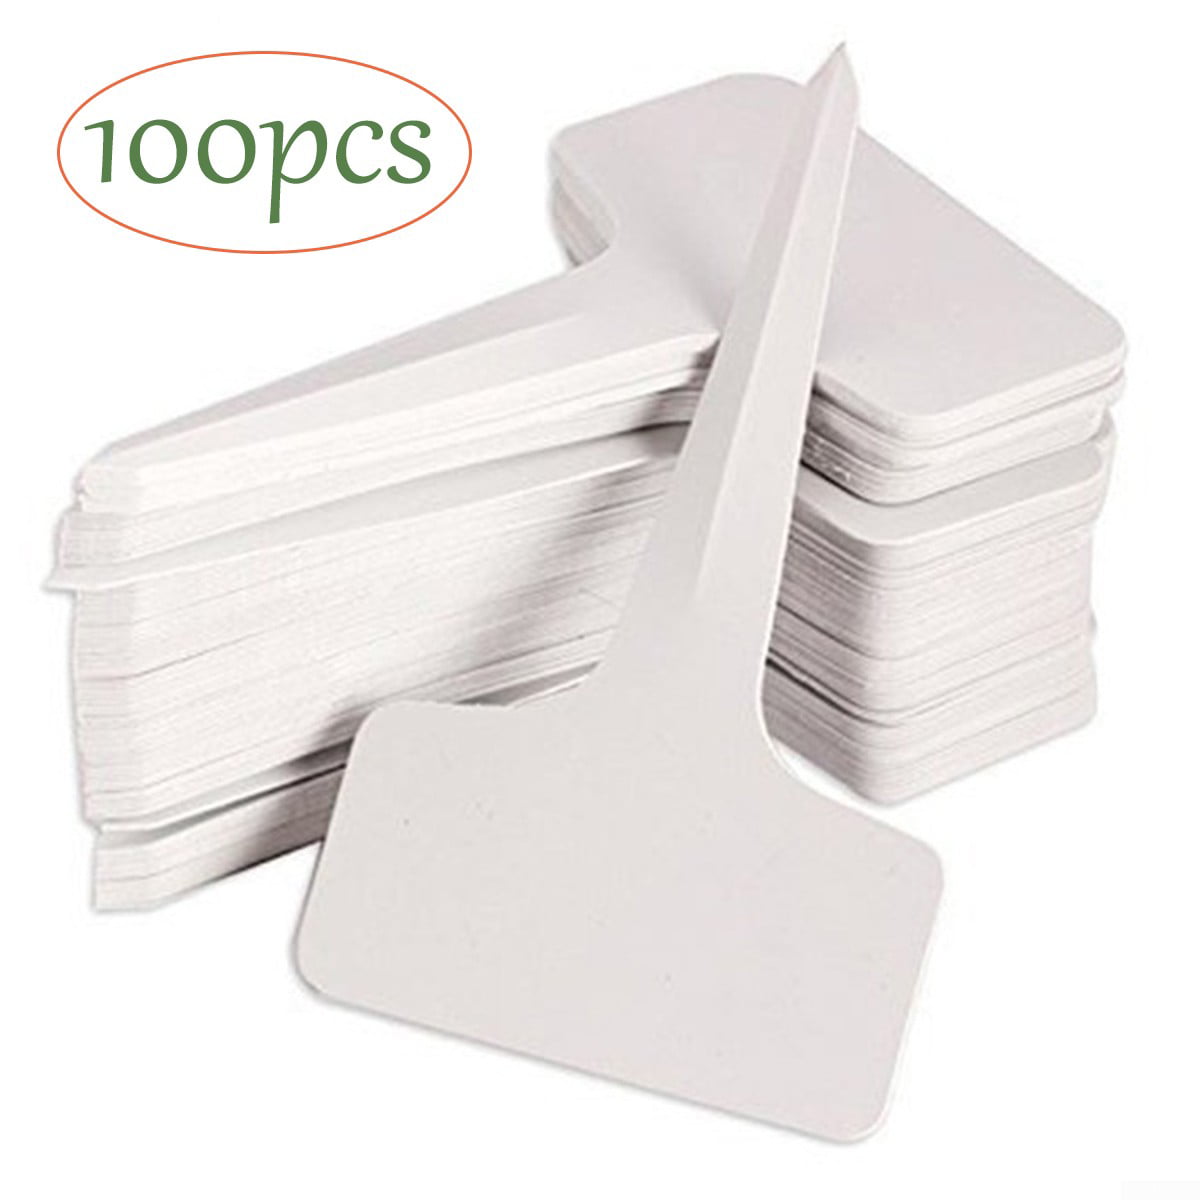 100X Plant Labels Markers Tags For Garden Nursery Tags Flowers Florist Reusable 